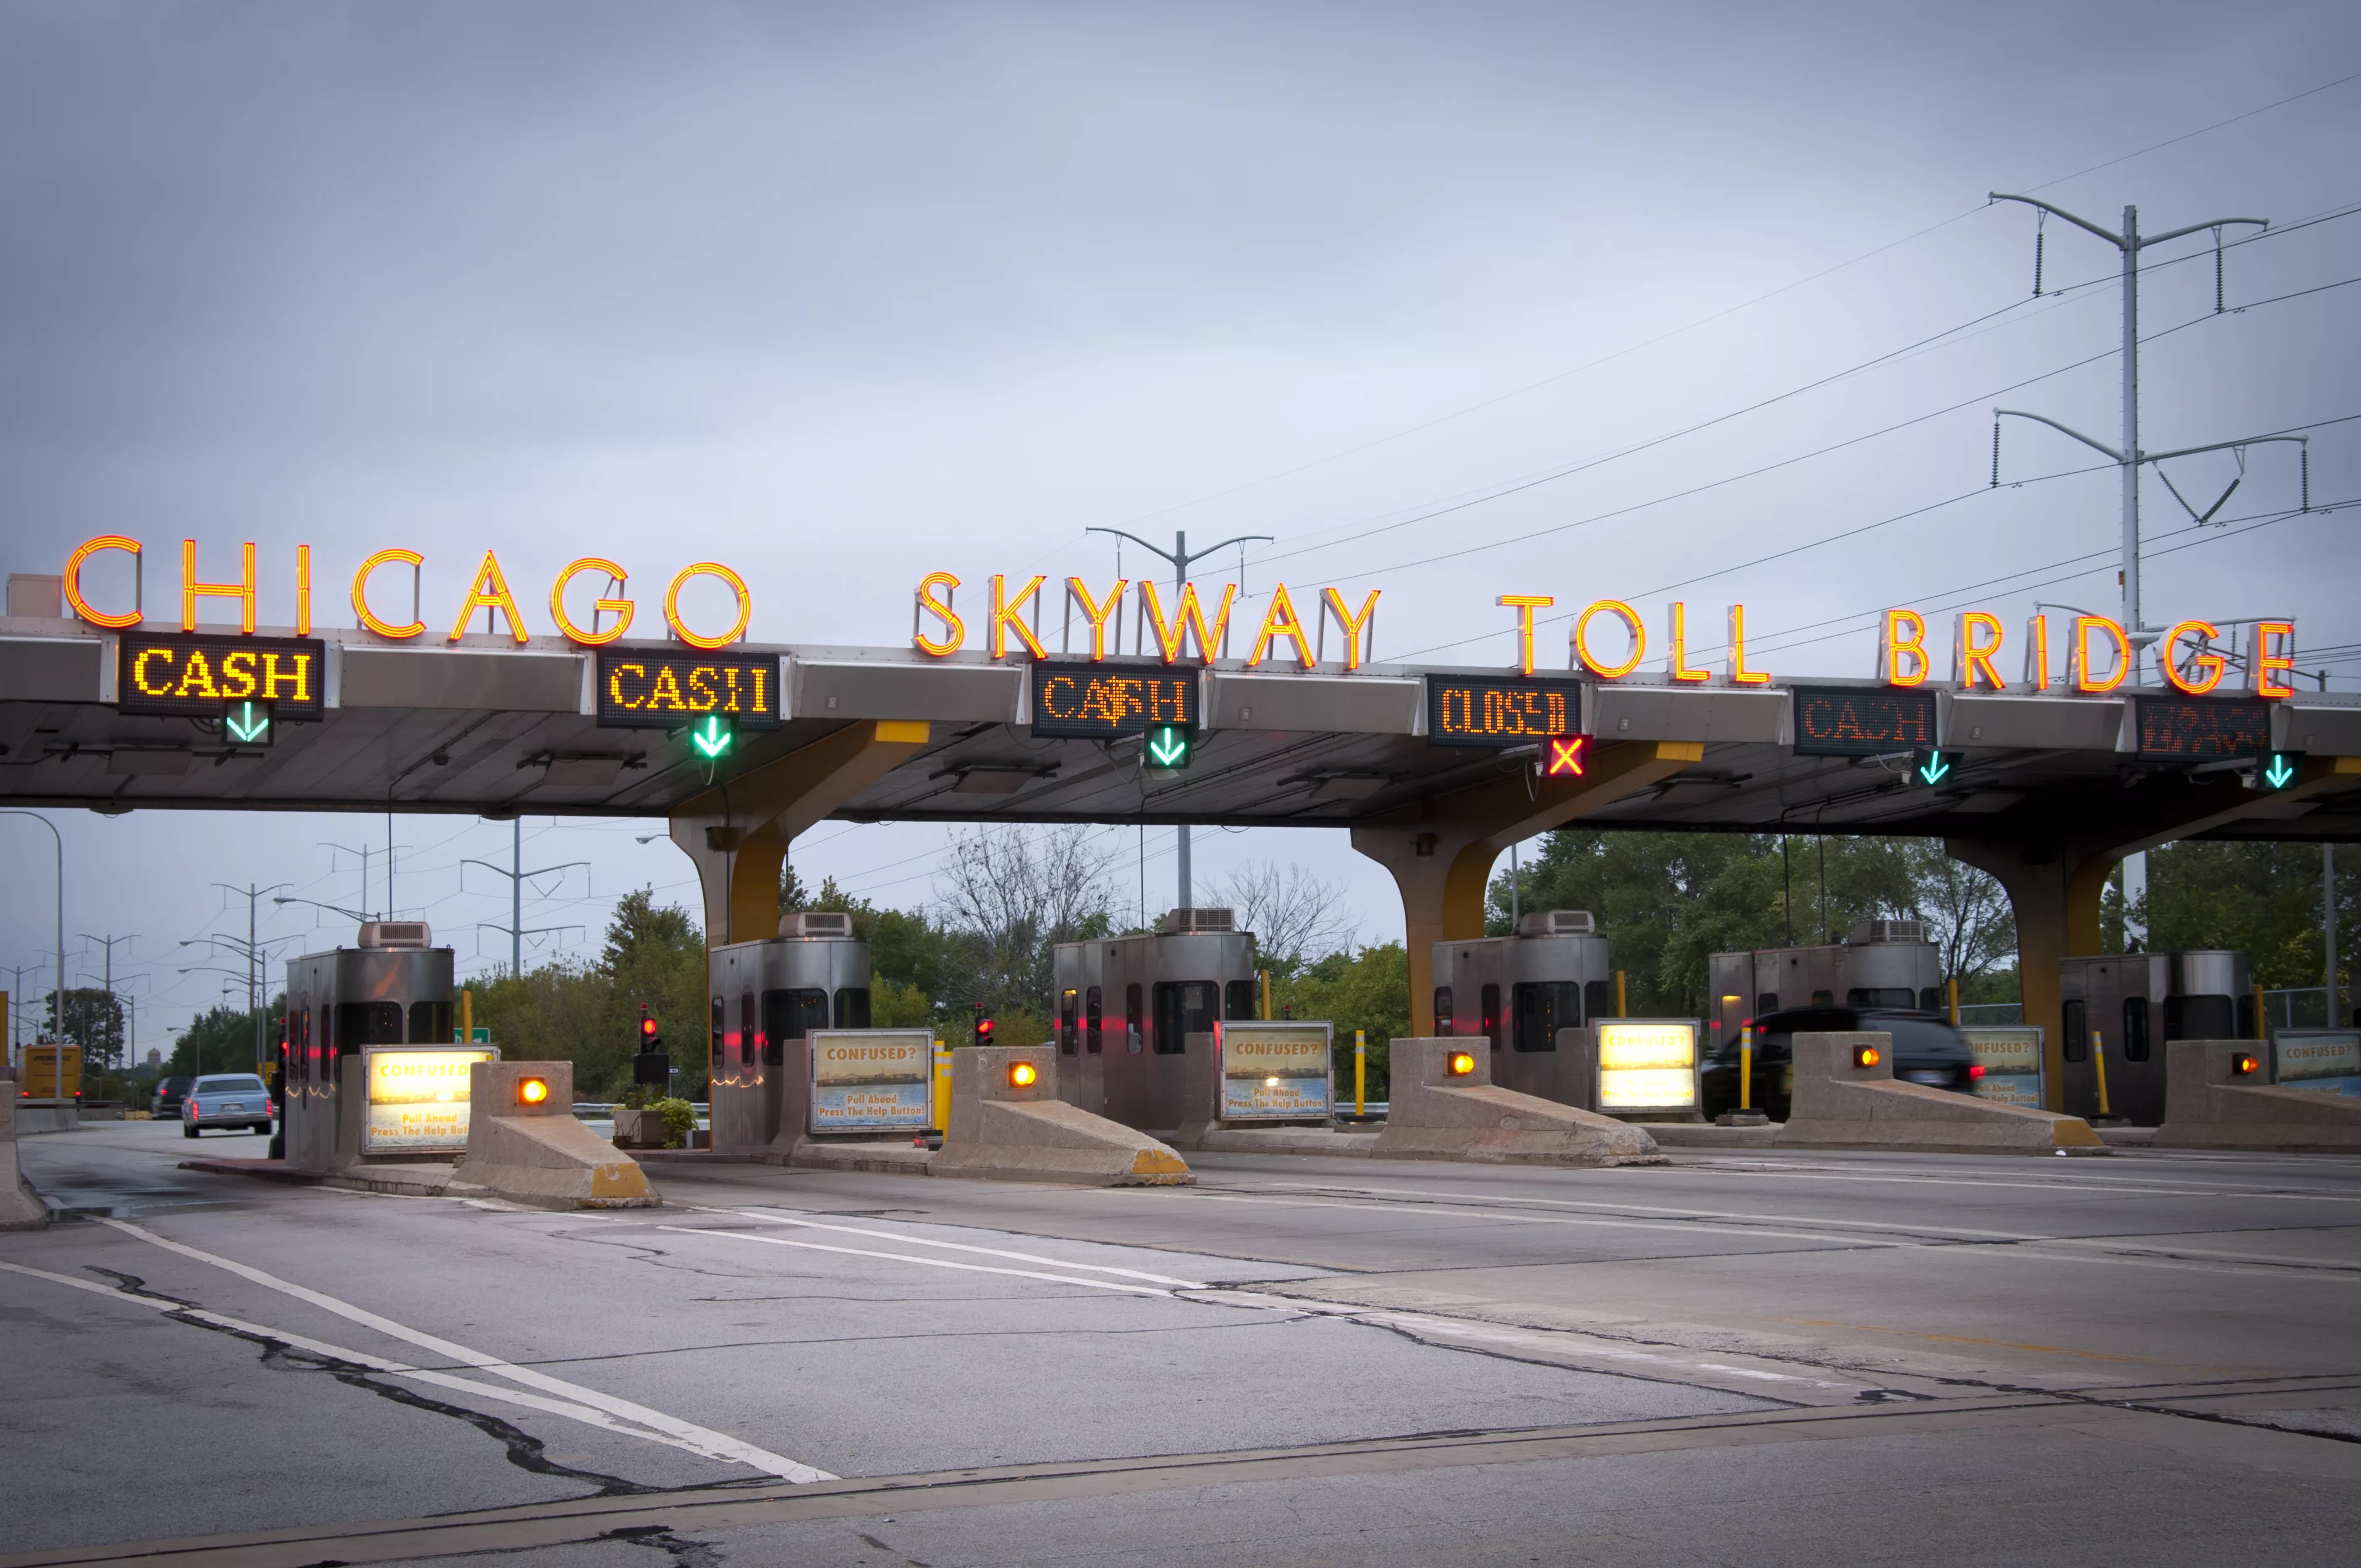 chicago_skyway_toll_booth_5007814217-jpg-2